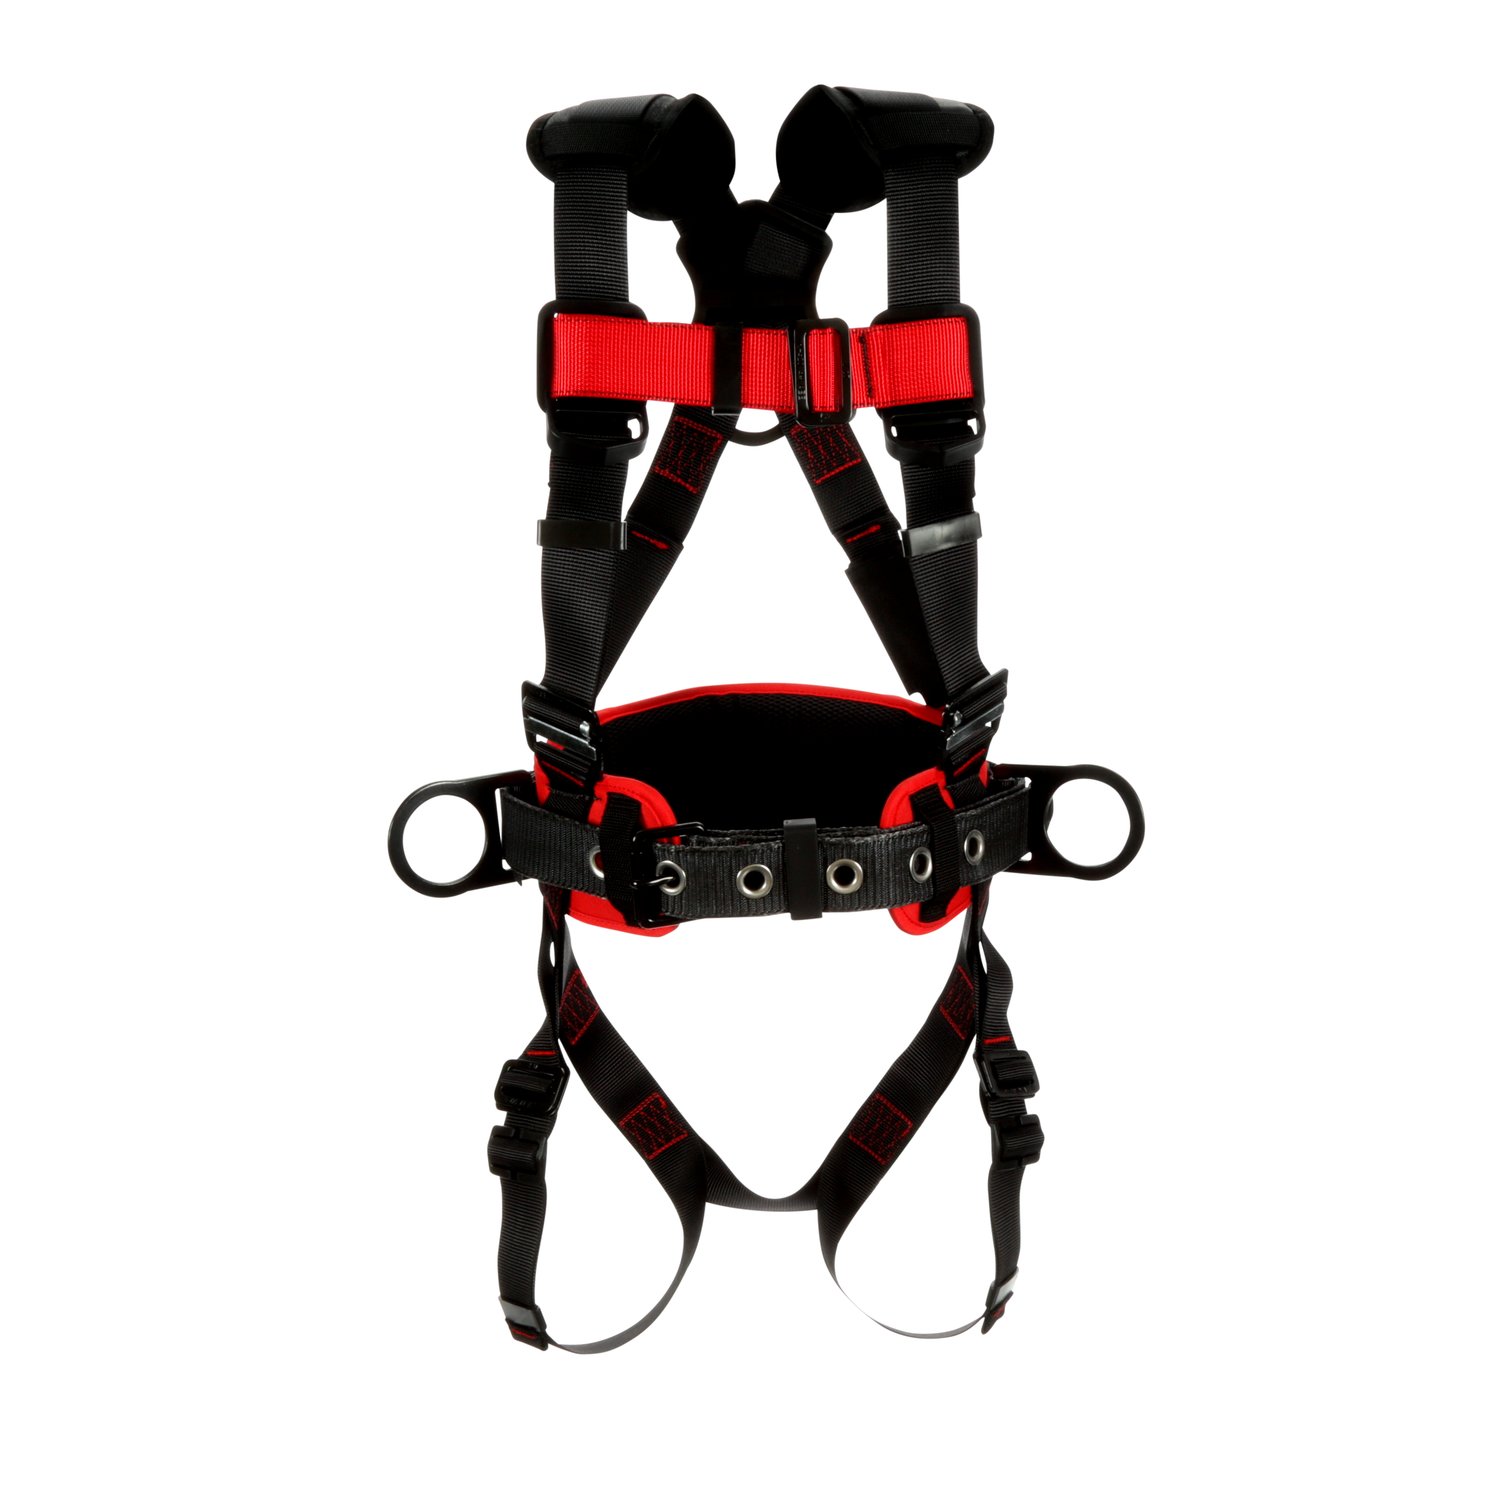 7012816645 - 3M Protecta P200 Construction Positioning Safety Harness 1161306, X-Large